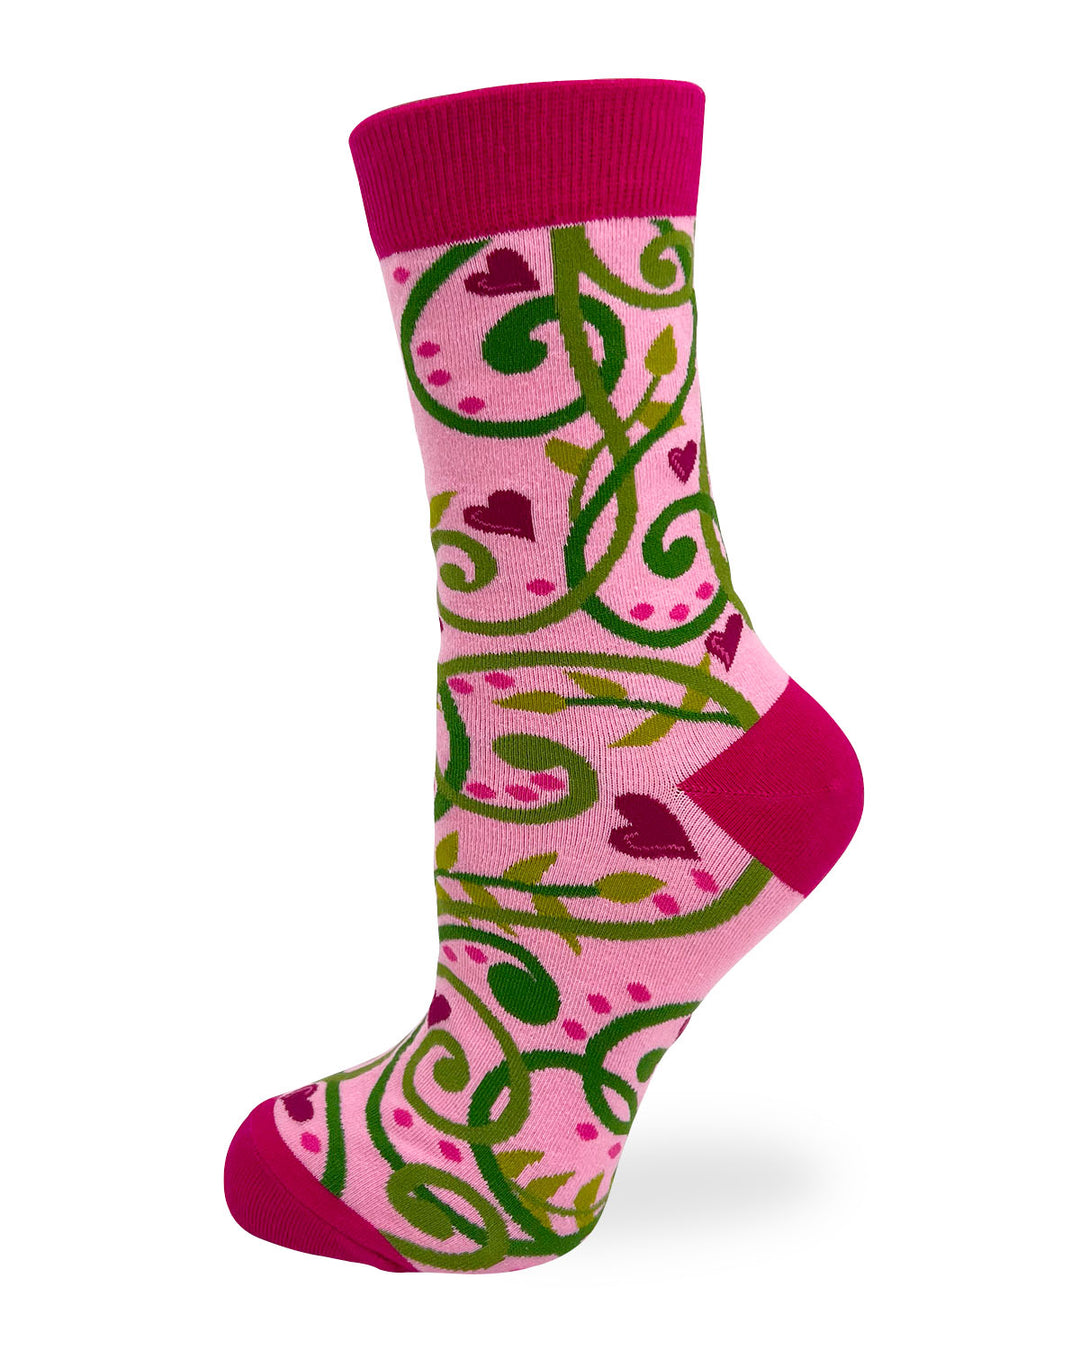 Count Your Blessings Women's Crew Socks in Pink